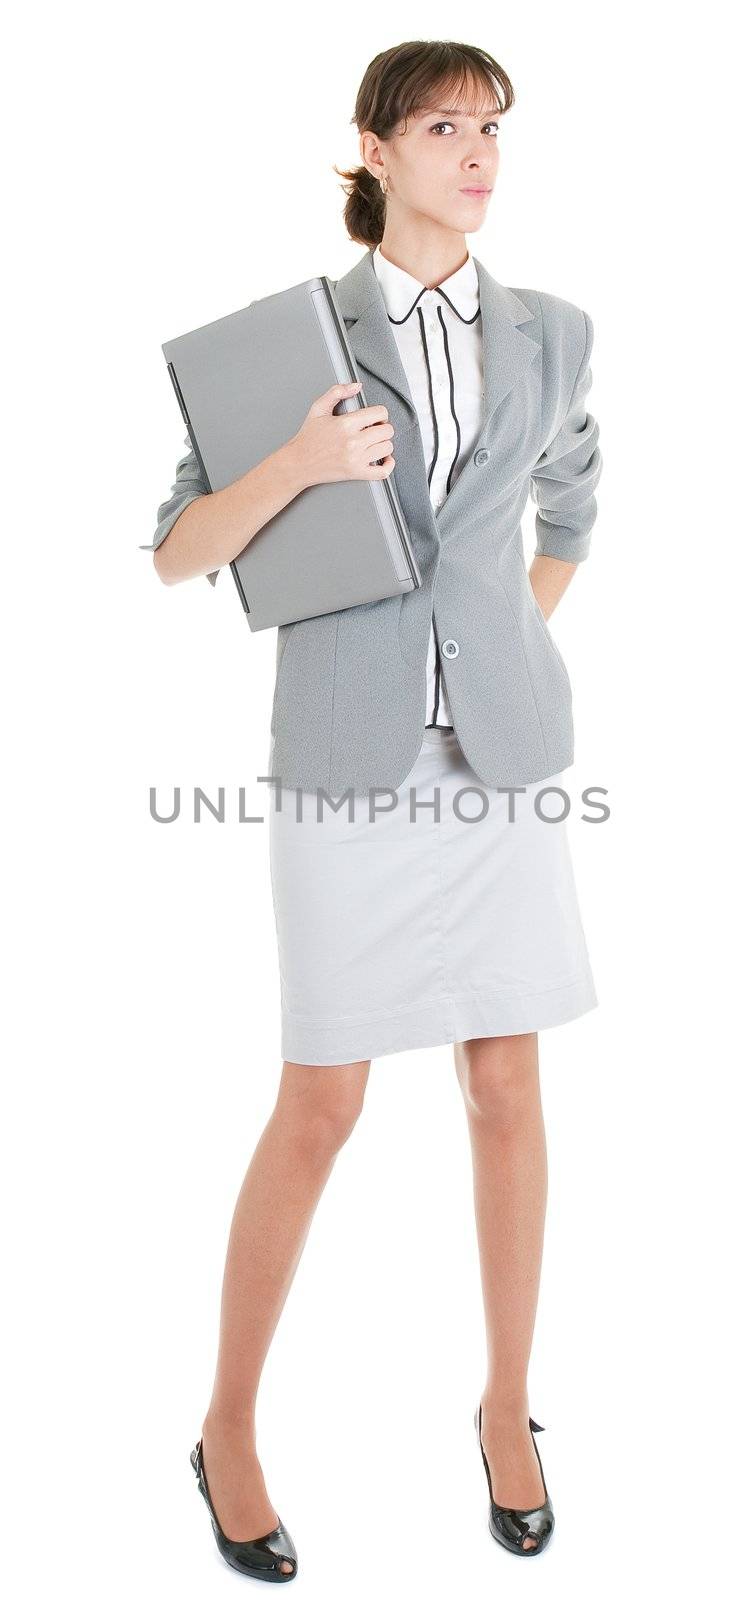 business woman  in spectacles and laptop on white